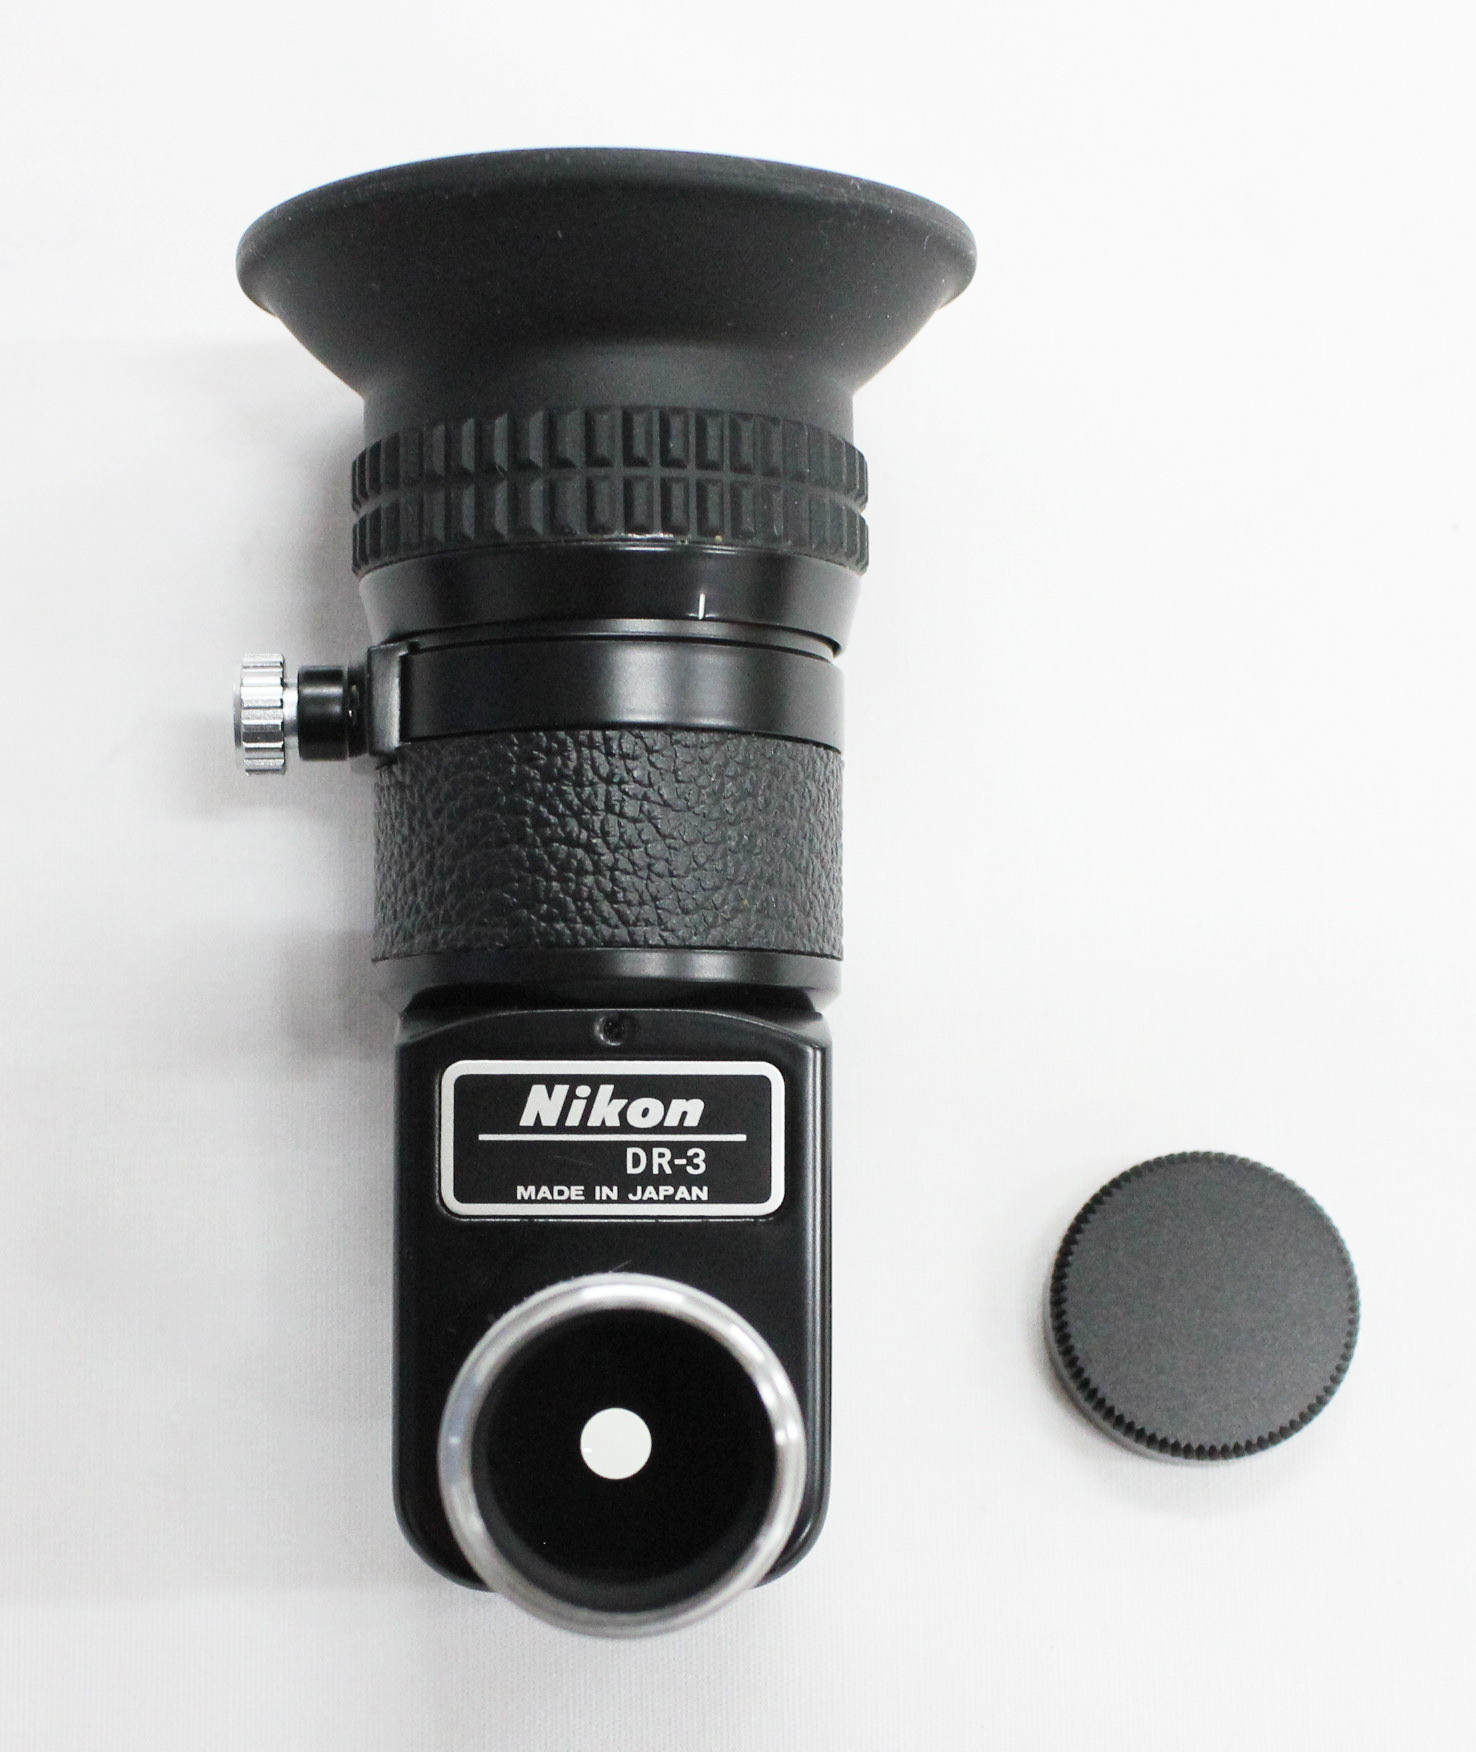 Japan Used Camera Shop | [N.Mint] Nikon DR-3 Right Angle Viewfinder from Japan